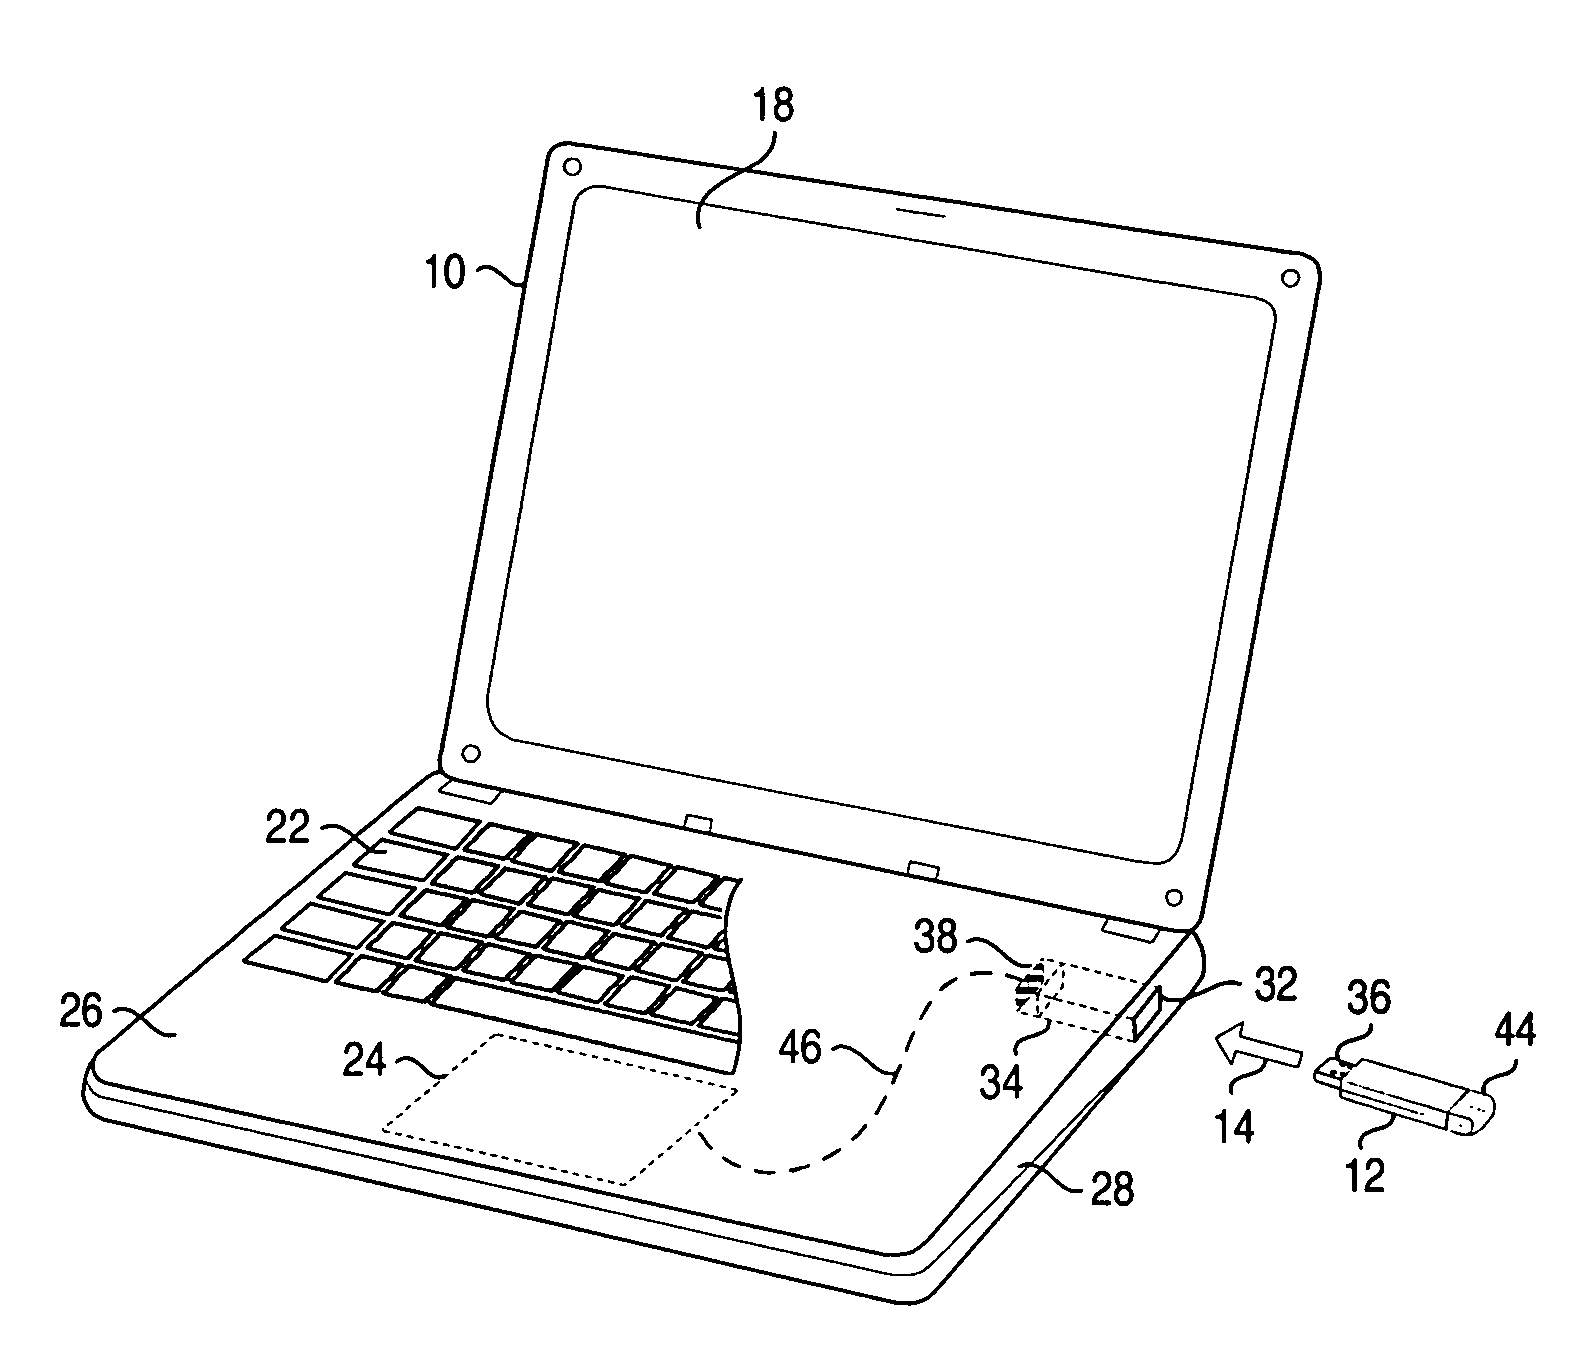 Portable computing device housing assembly, and associated methodology, providing for carriage of an external mass storage device